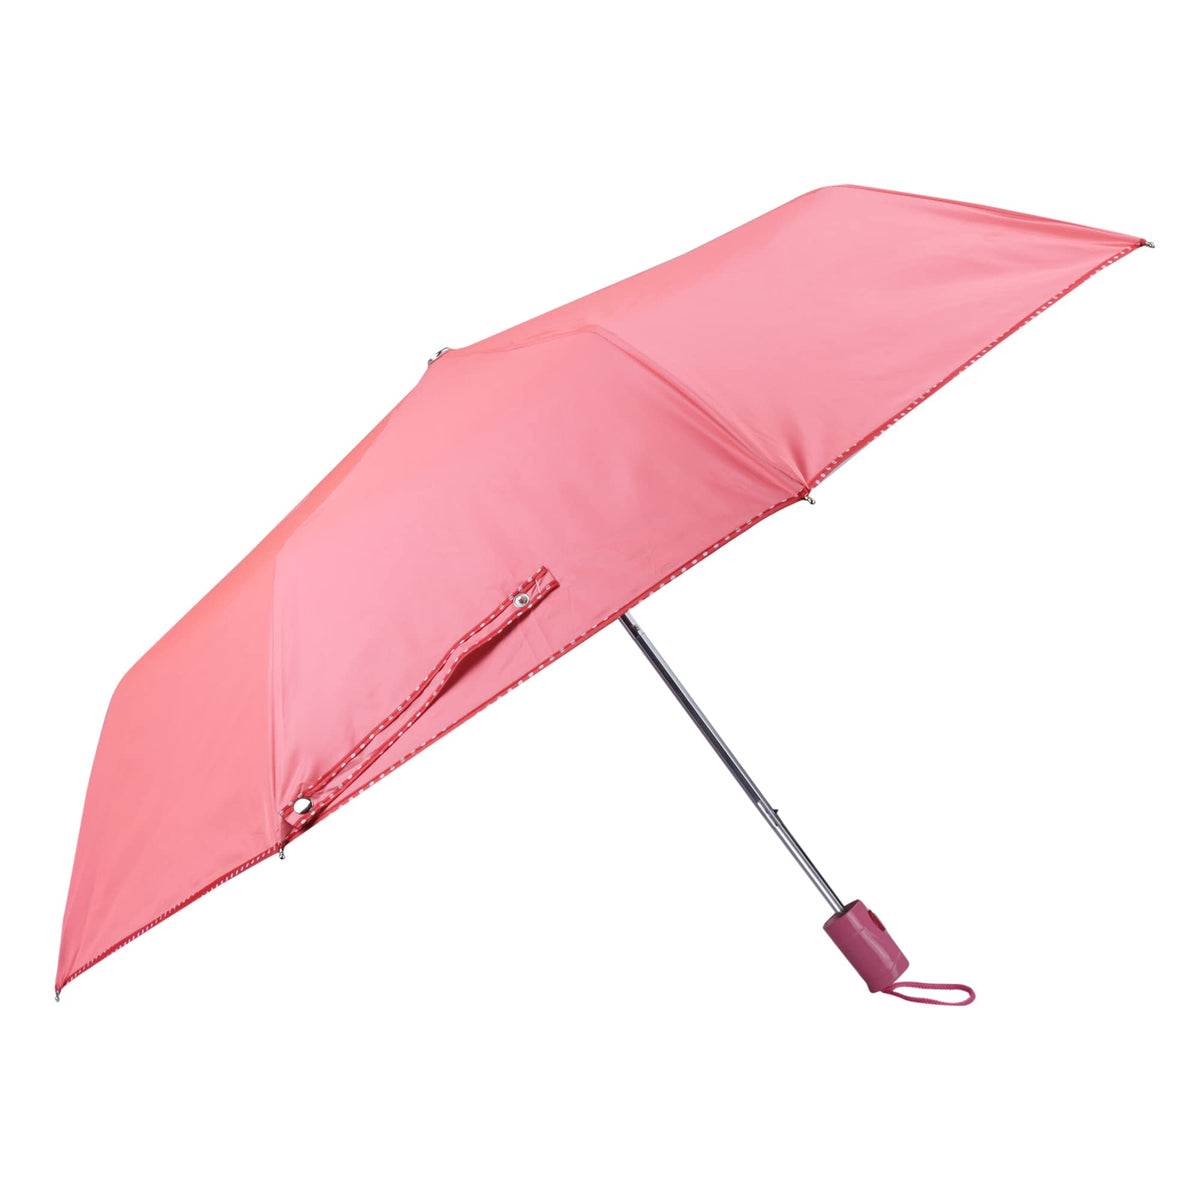 THE CLOWNFISH Umbrella Monochrome Series 3 Fold Auto Open Waterproof Water Repellent 190 T Polyester Double Coated Silver Lined Dotted Border Umbrellas For Men and Women (Dark Peach)